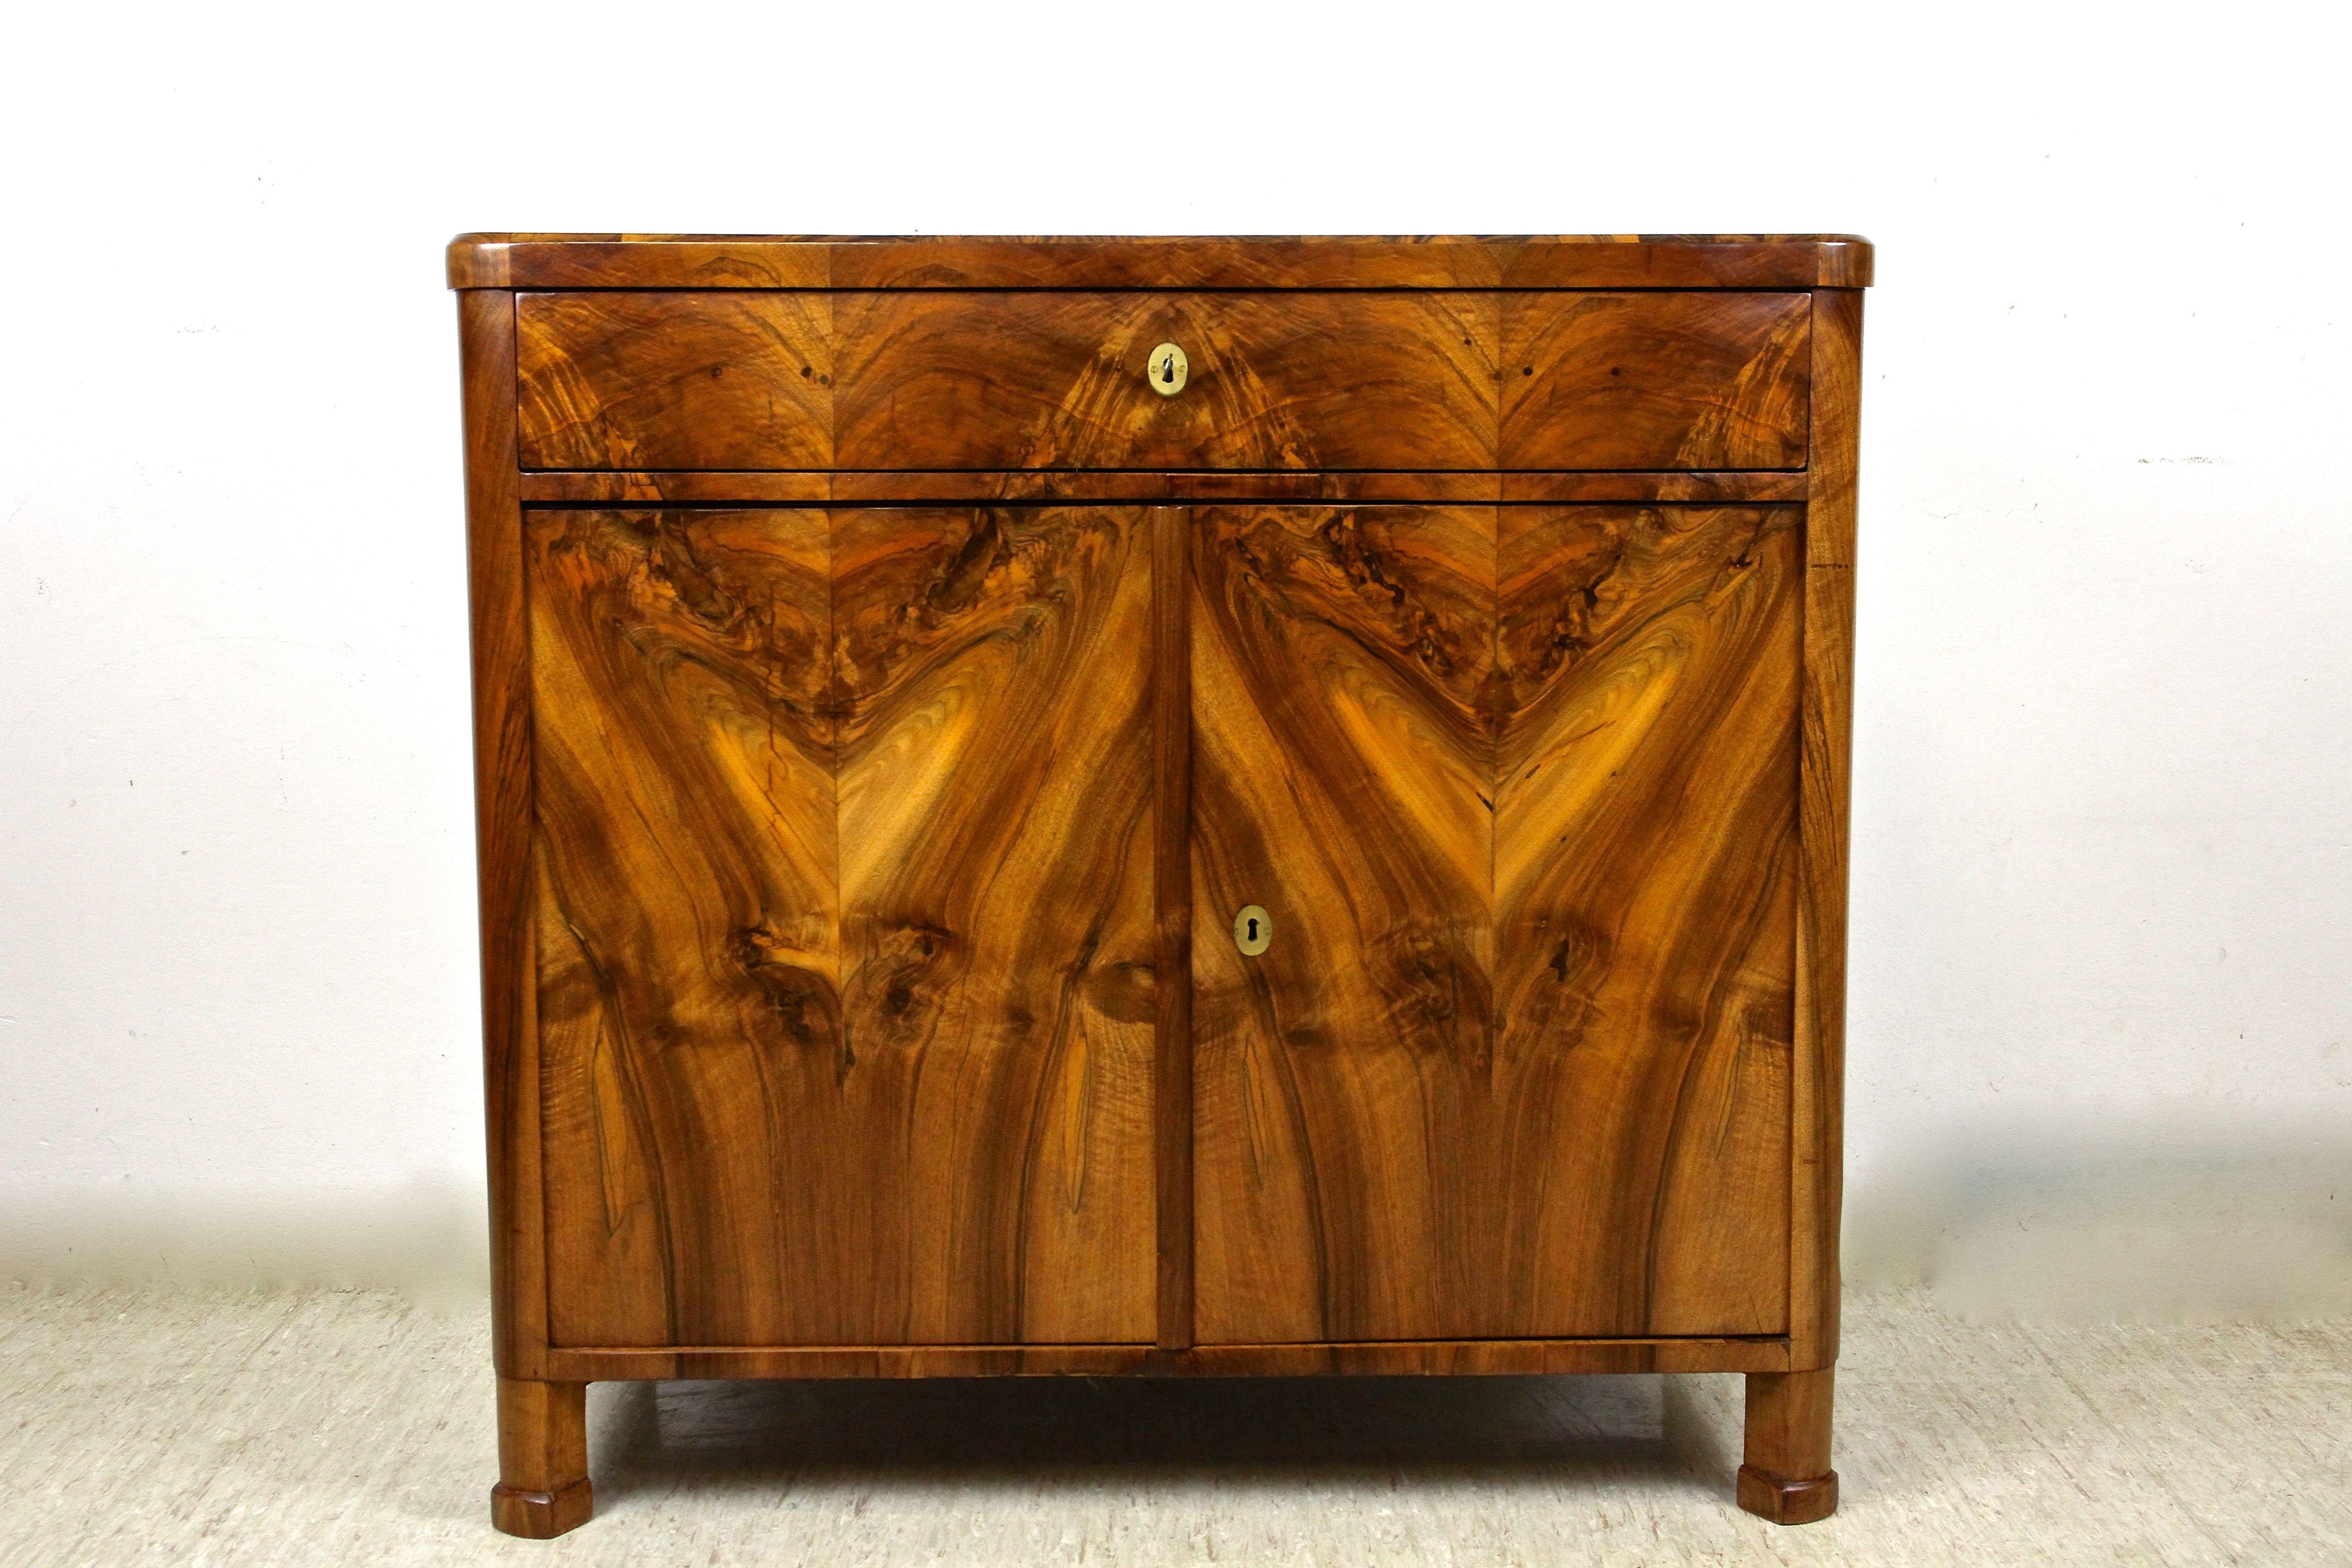 Outstanding 19th century Biedermeier nutwood trumeau commode from the early period around 1835 in Austria. Veneered with finest nutwood, this exceptional commode impresses with an absolute breathtaking mirrormatched grain that 